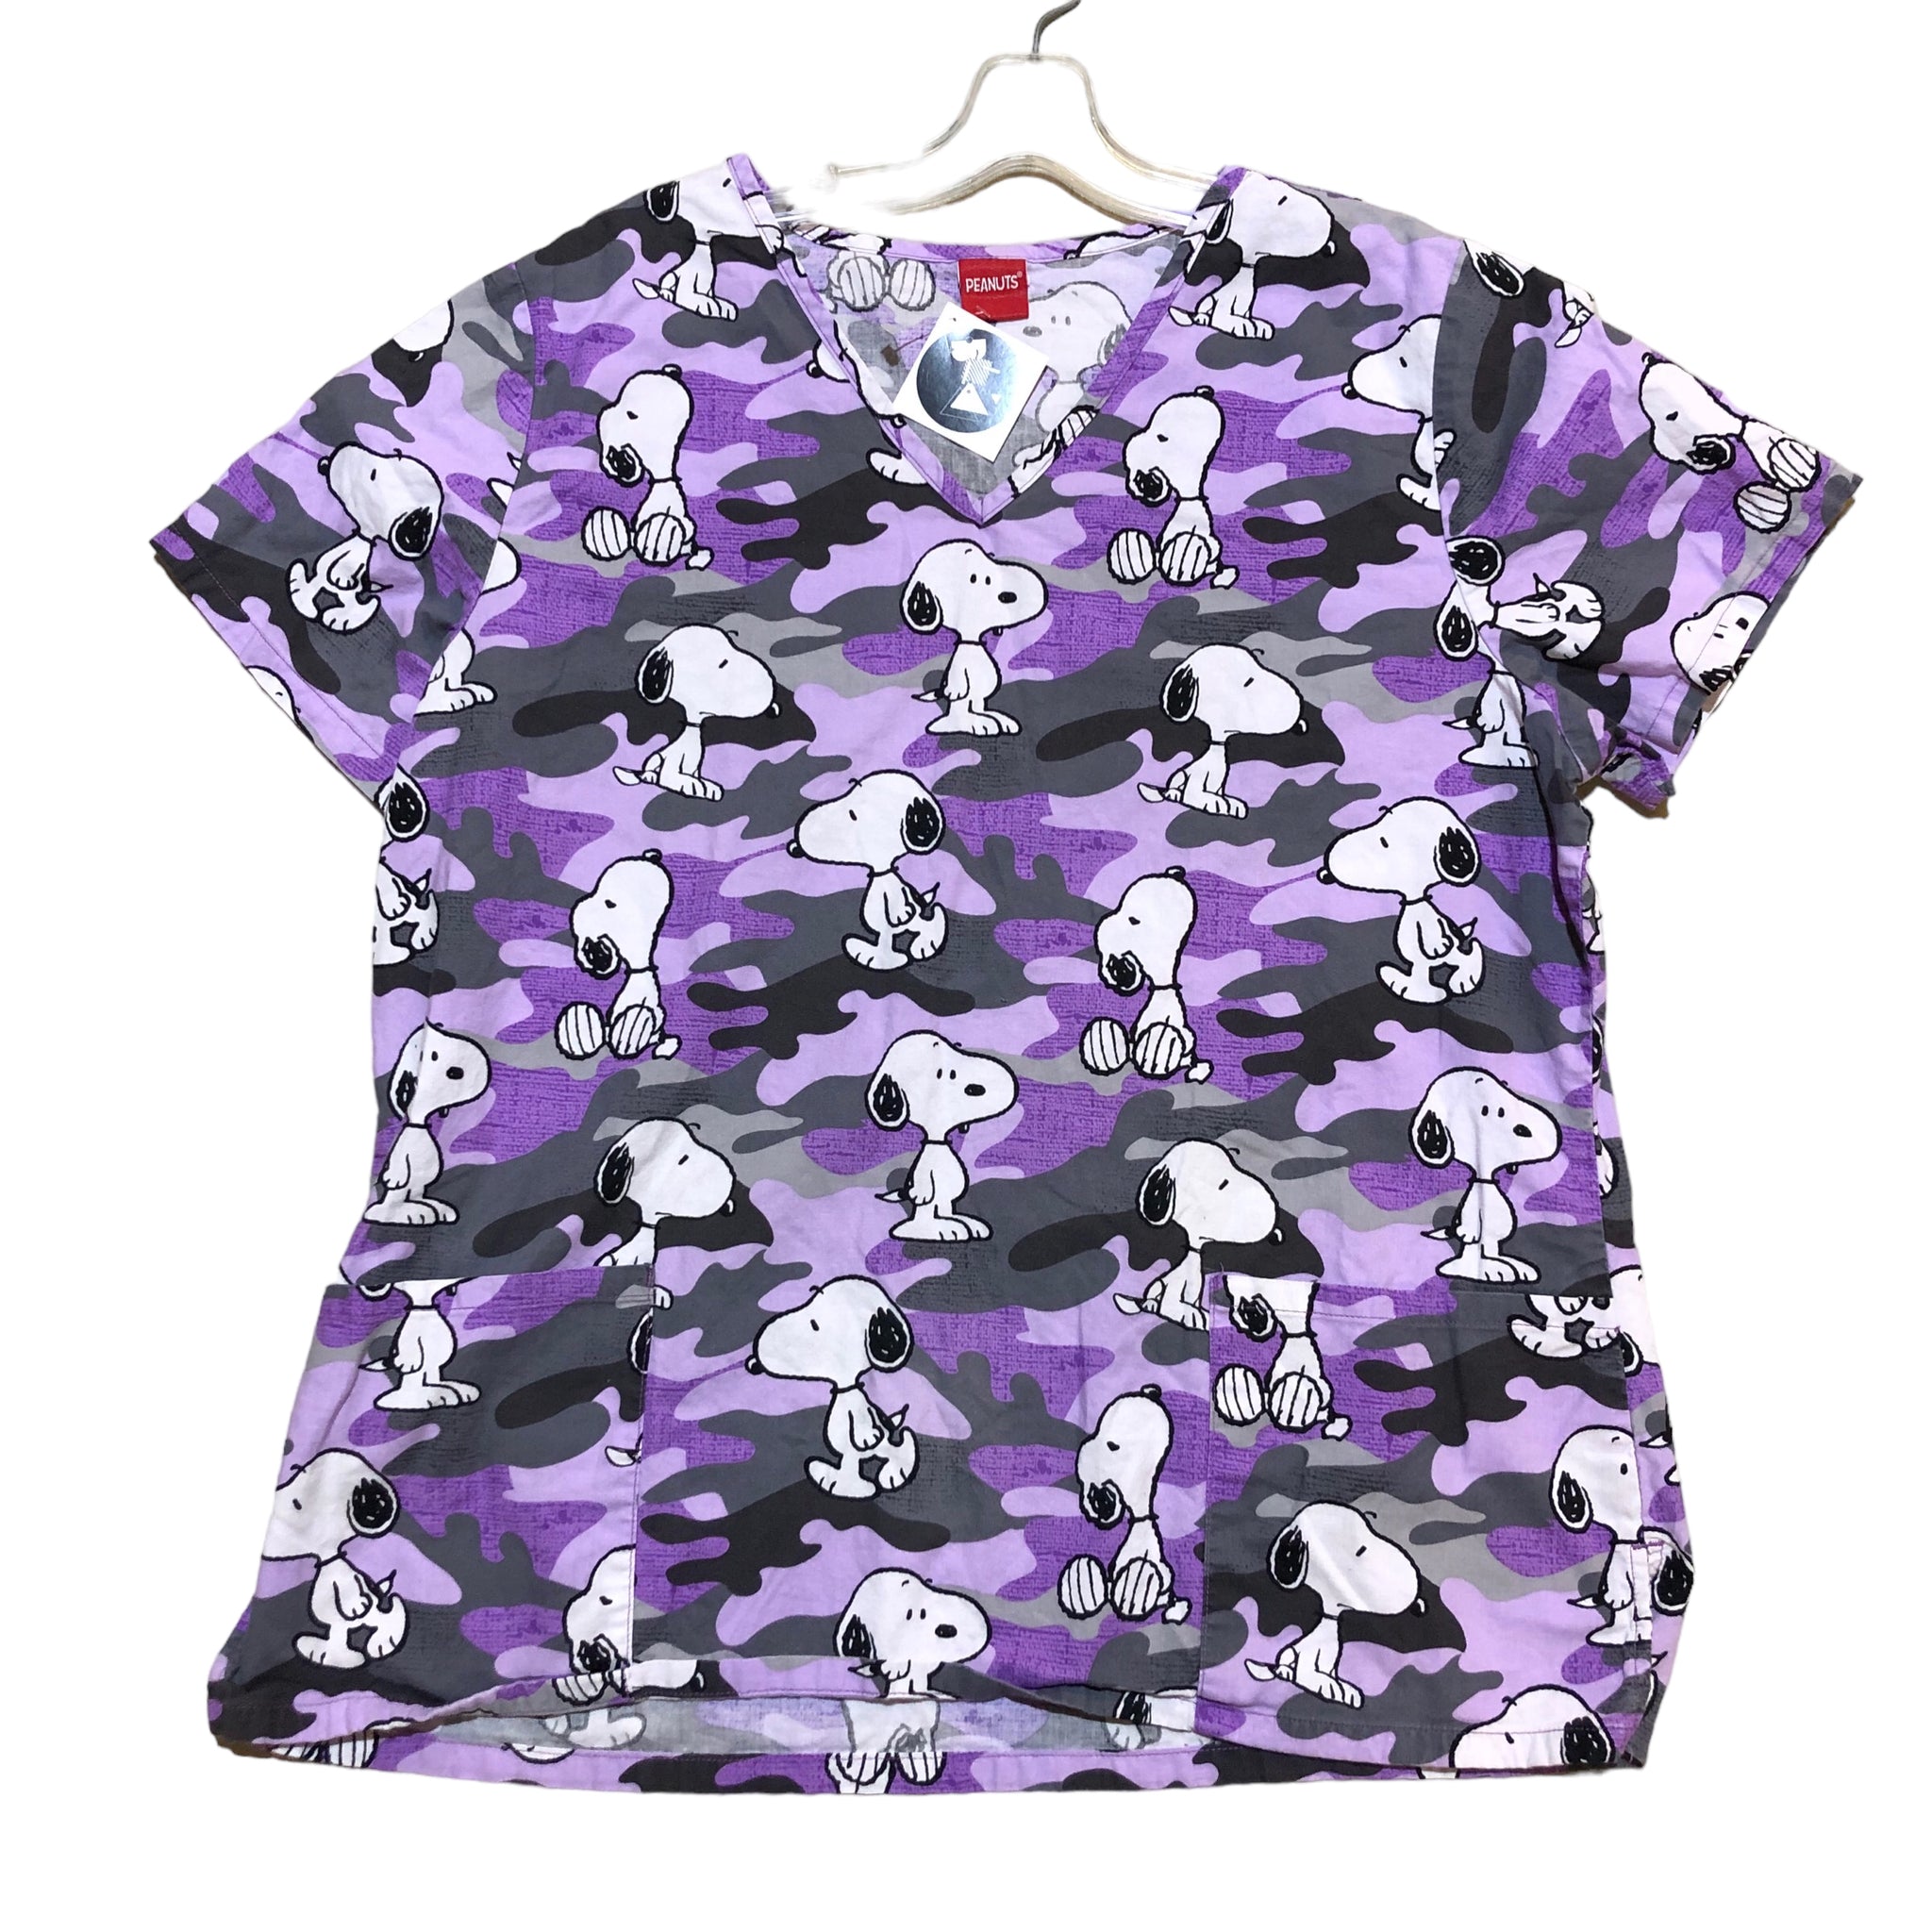 Snoopy Cotton Top